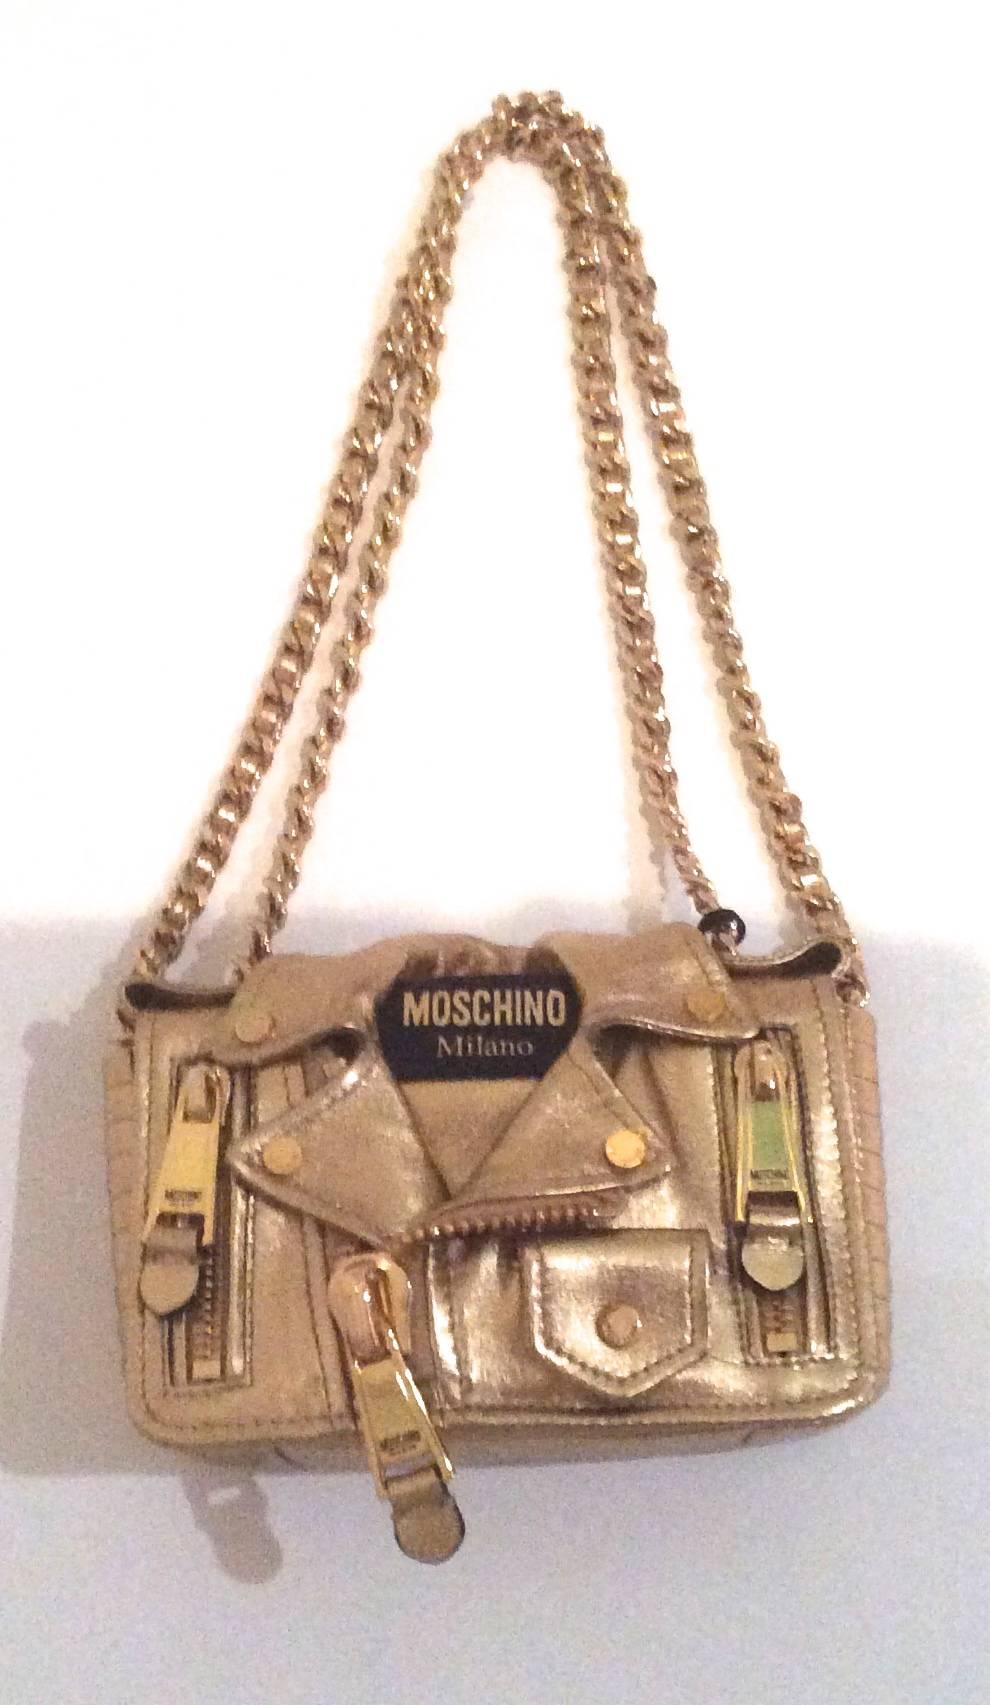 This gold biker Moschino handbag is designed to resemble a gold toned shiny leather jacket. The front of the bag has large zippers with small pockets on the front of the bag. The bag has a snap closure and the cover of the front of the jacket lifts